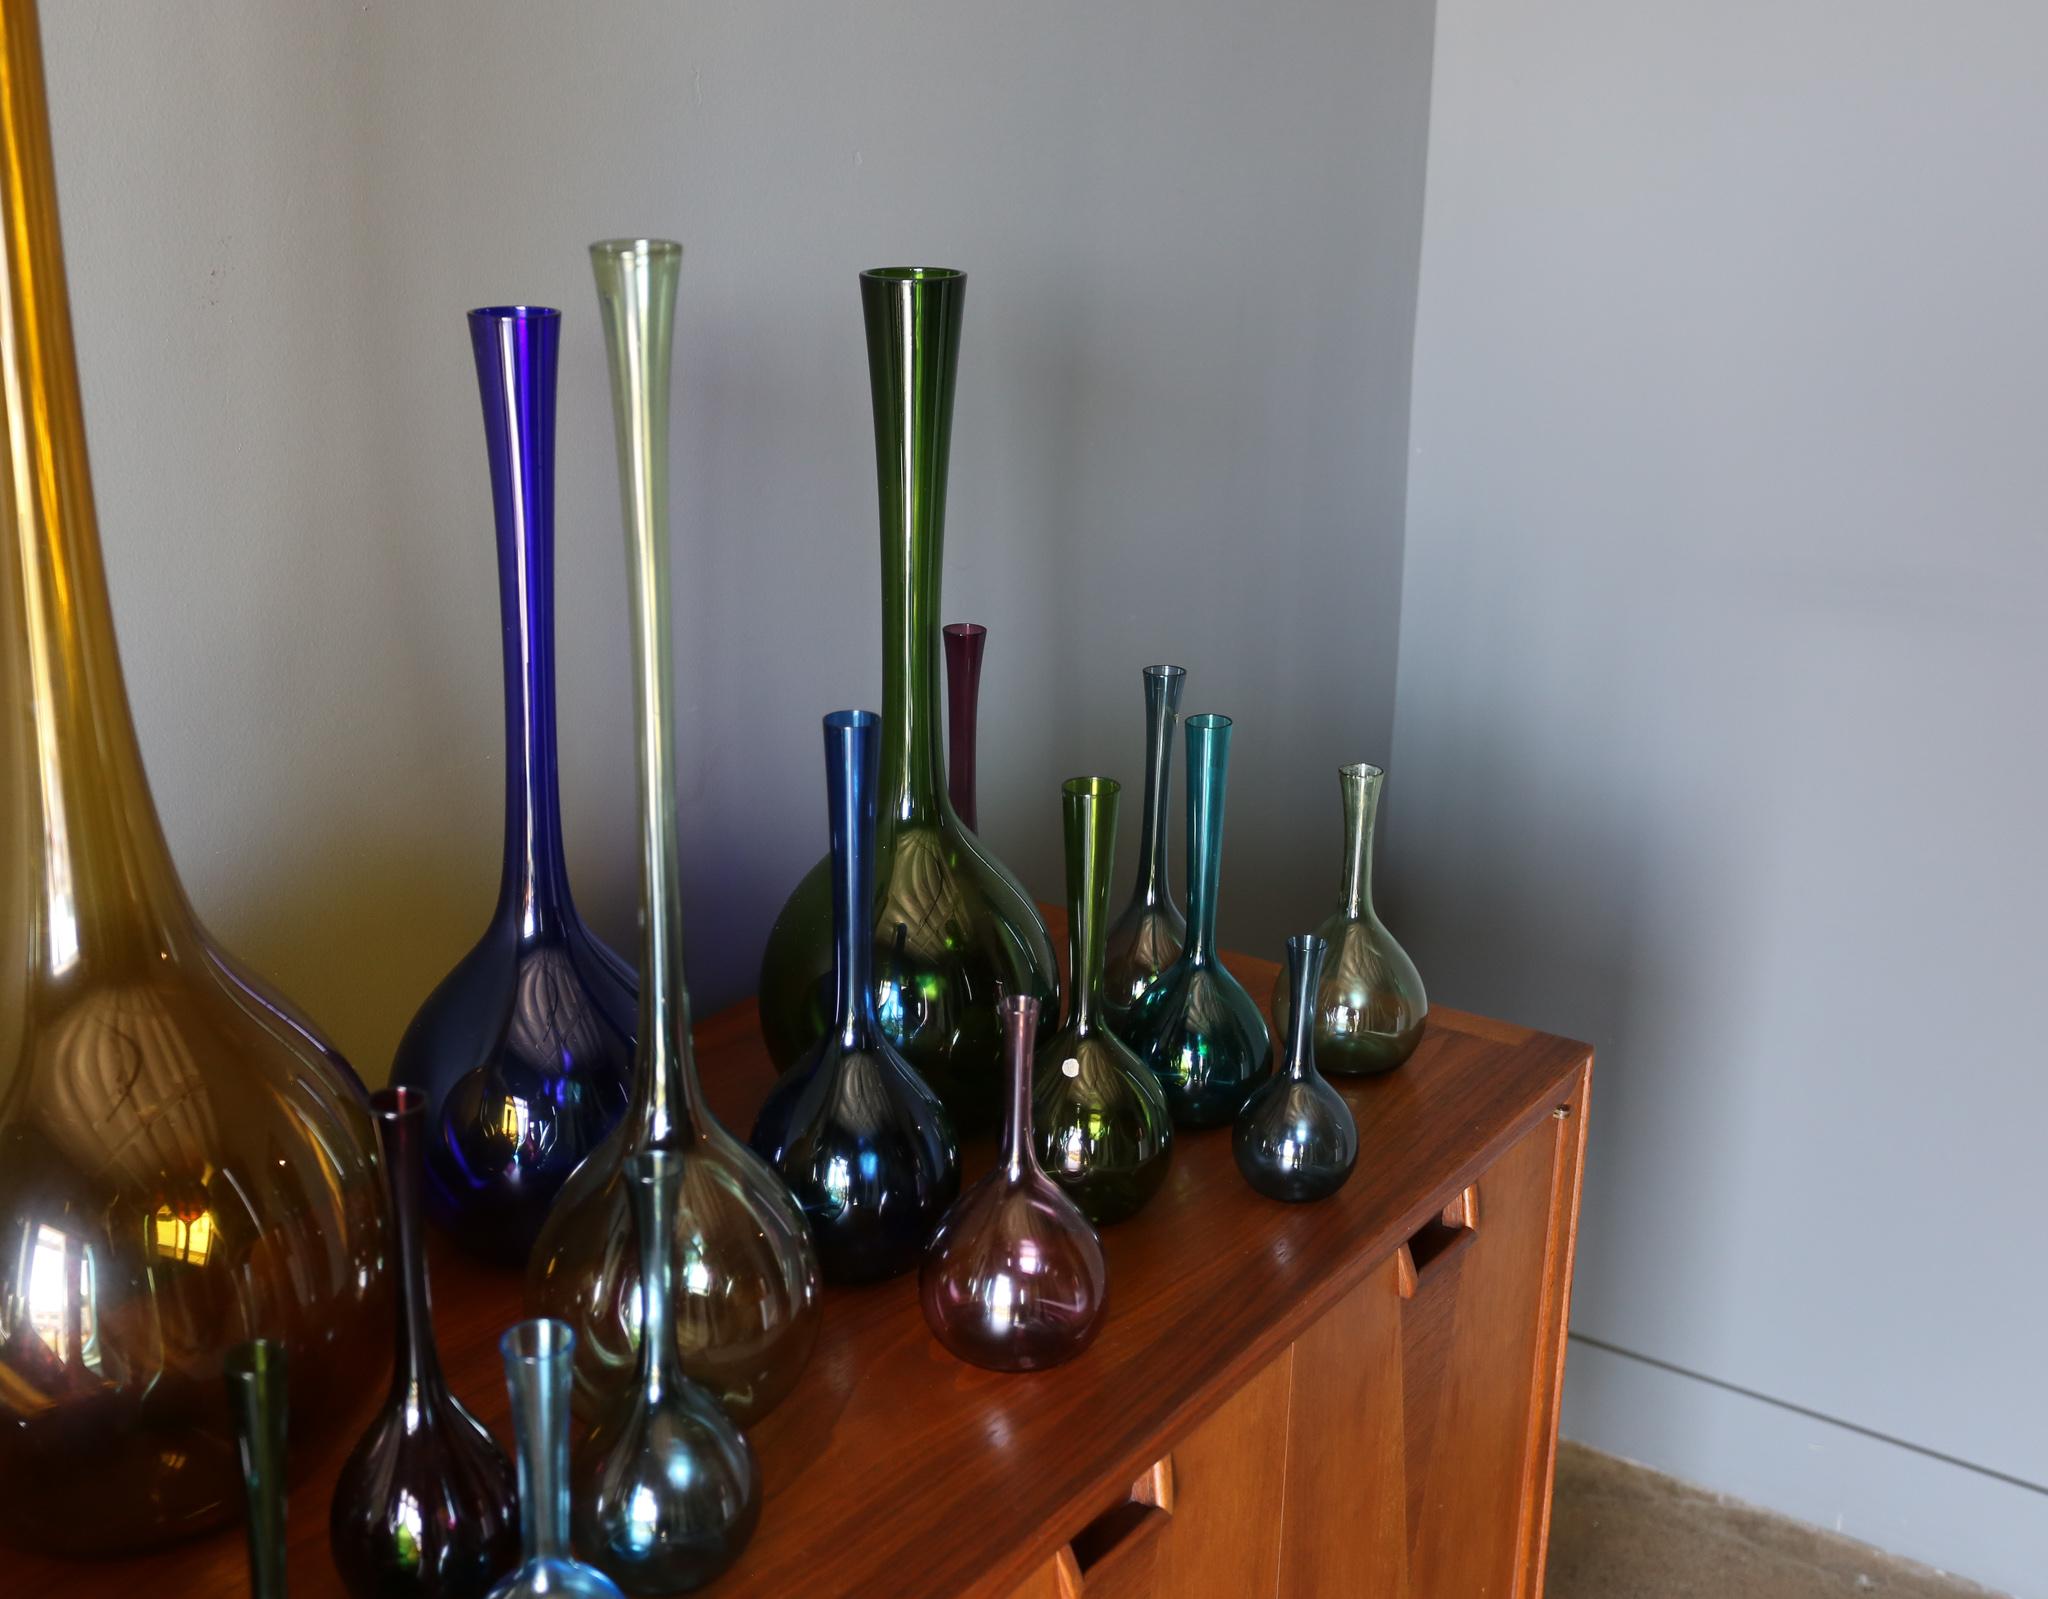 Mid-Century Modern Arthur Percy Collection of 32 Glass Vases for Gullaskruf of Sweden, circa 1955